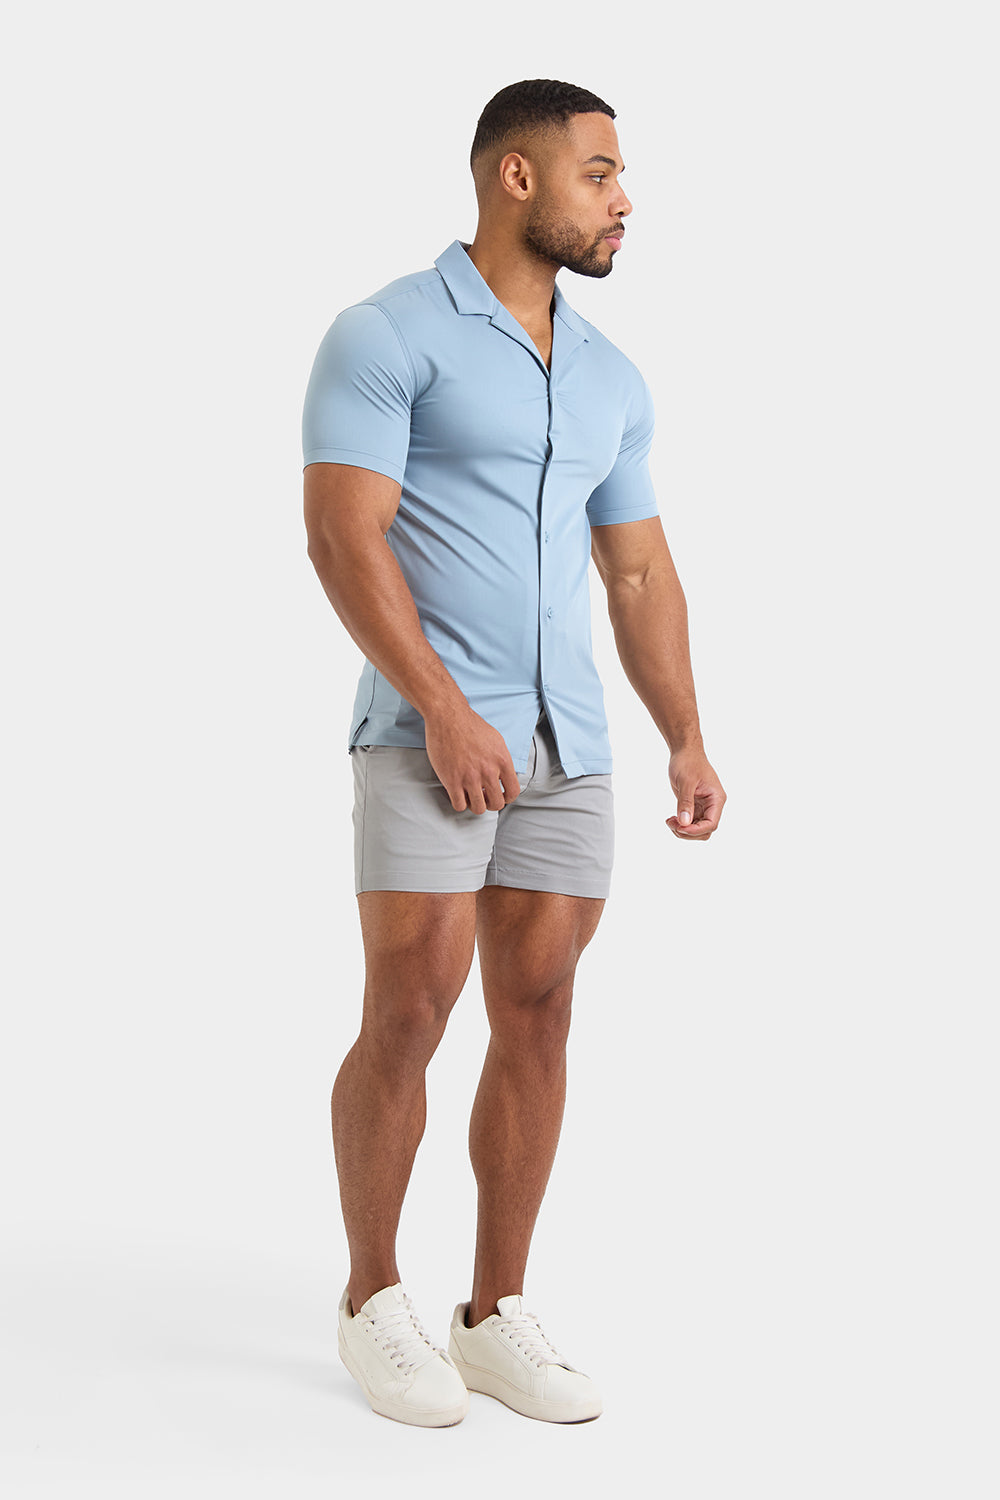 Bamboo Revere Collar Shirt in Duck Egg - TAILORED ATHLETE - ROW